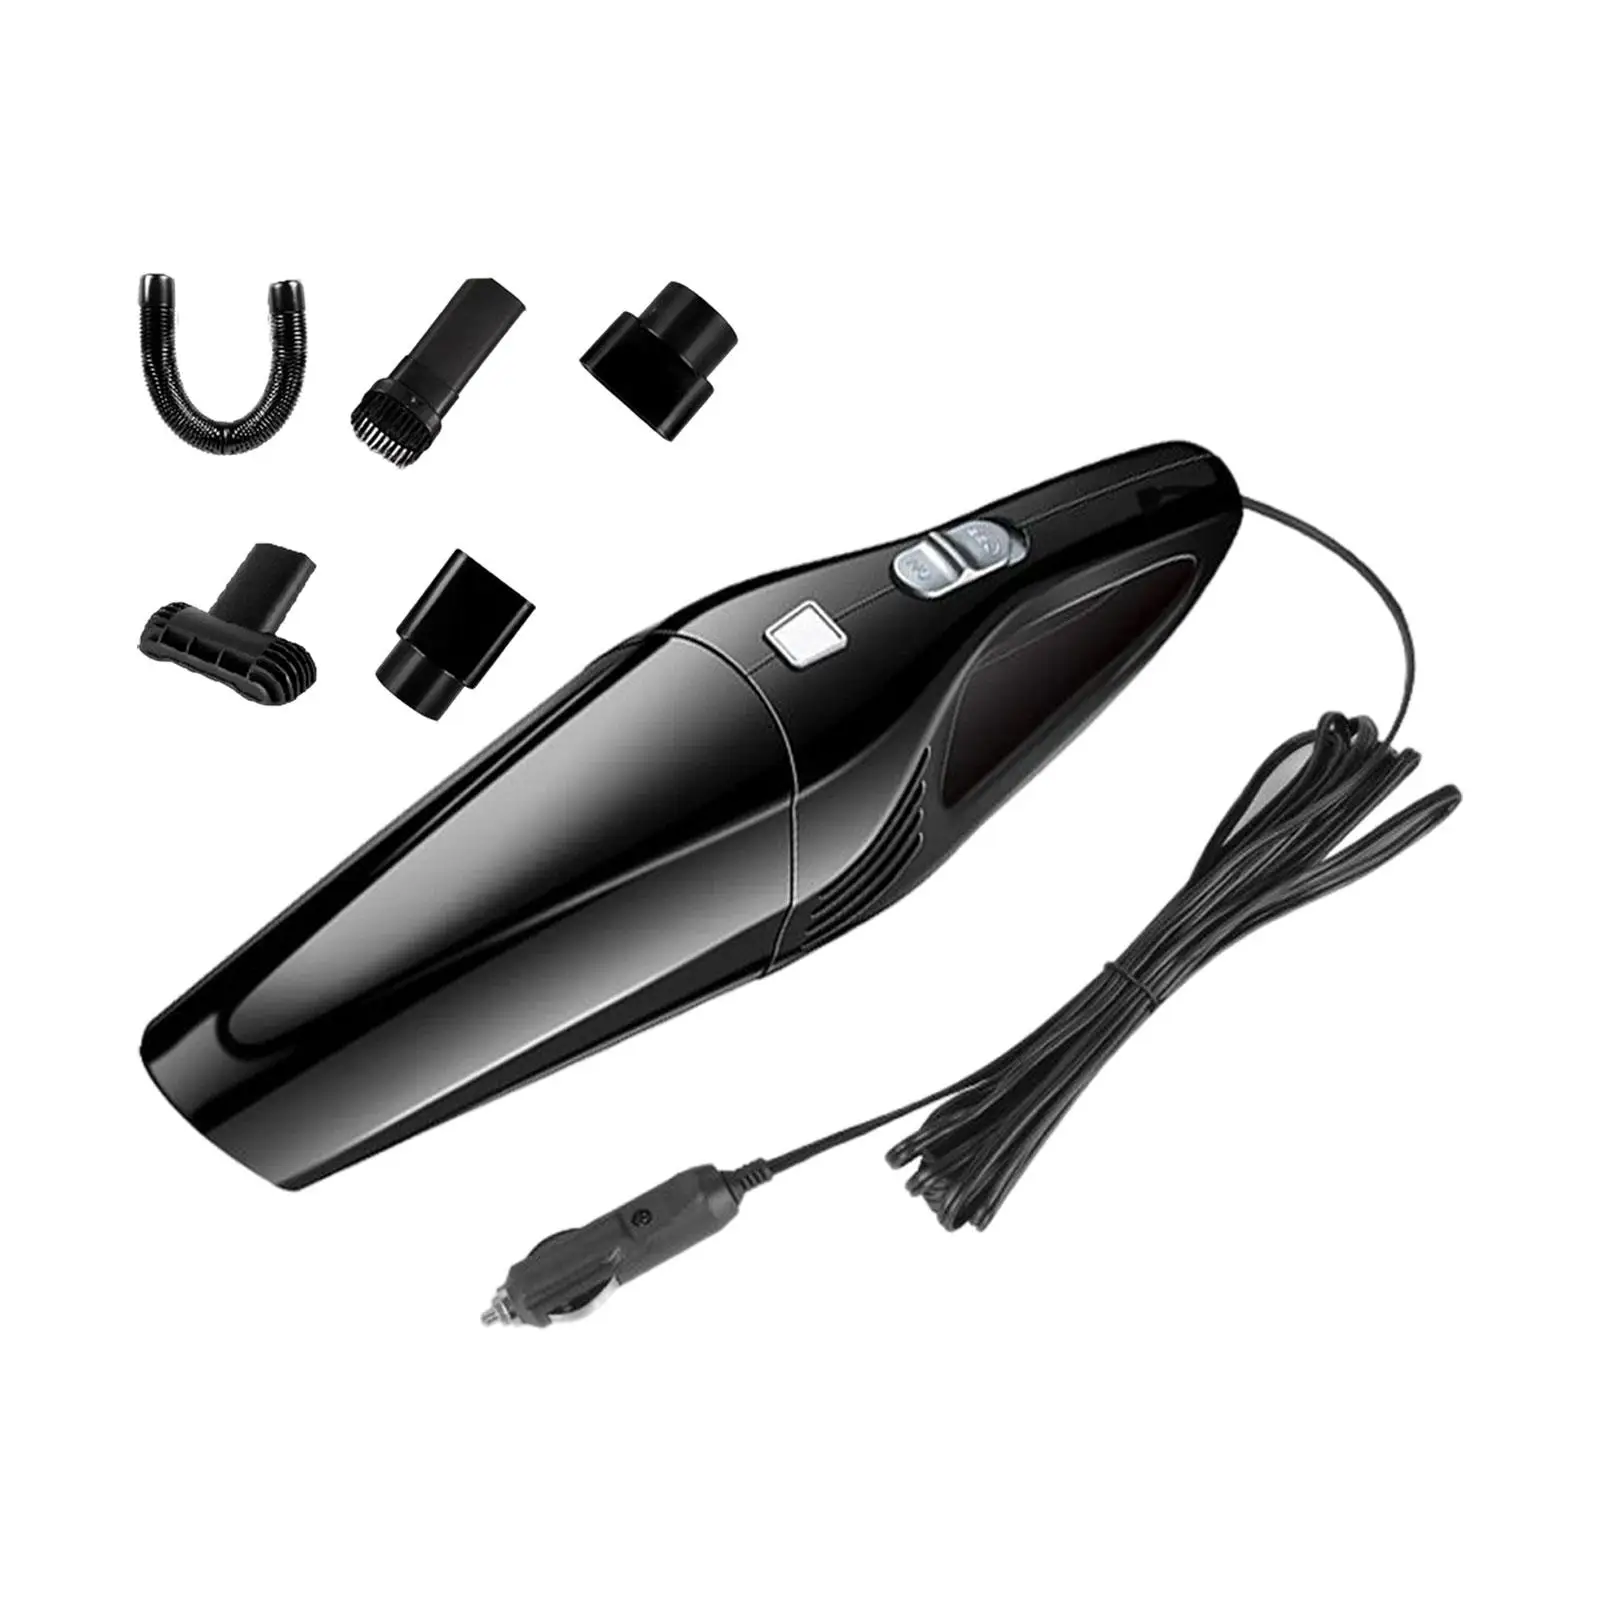 4800PA Car Vacuum Cleaner Wet and Dry Using Handheld Vacuum for Kitchen Car Interior Office Home